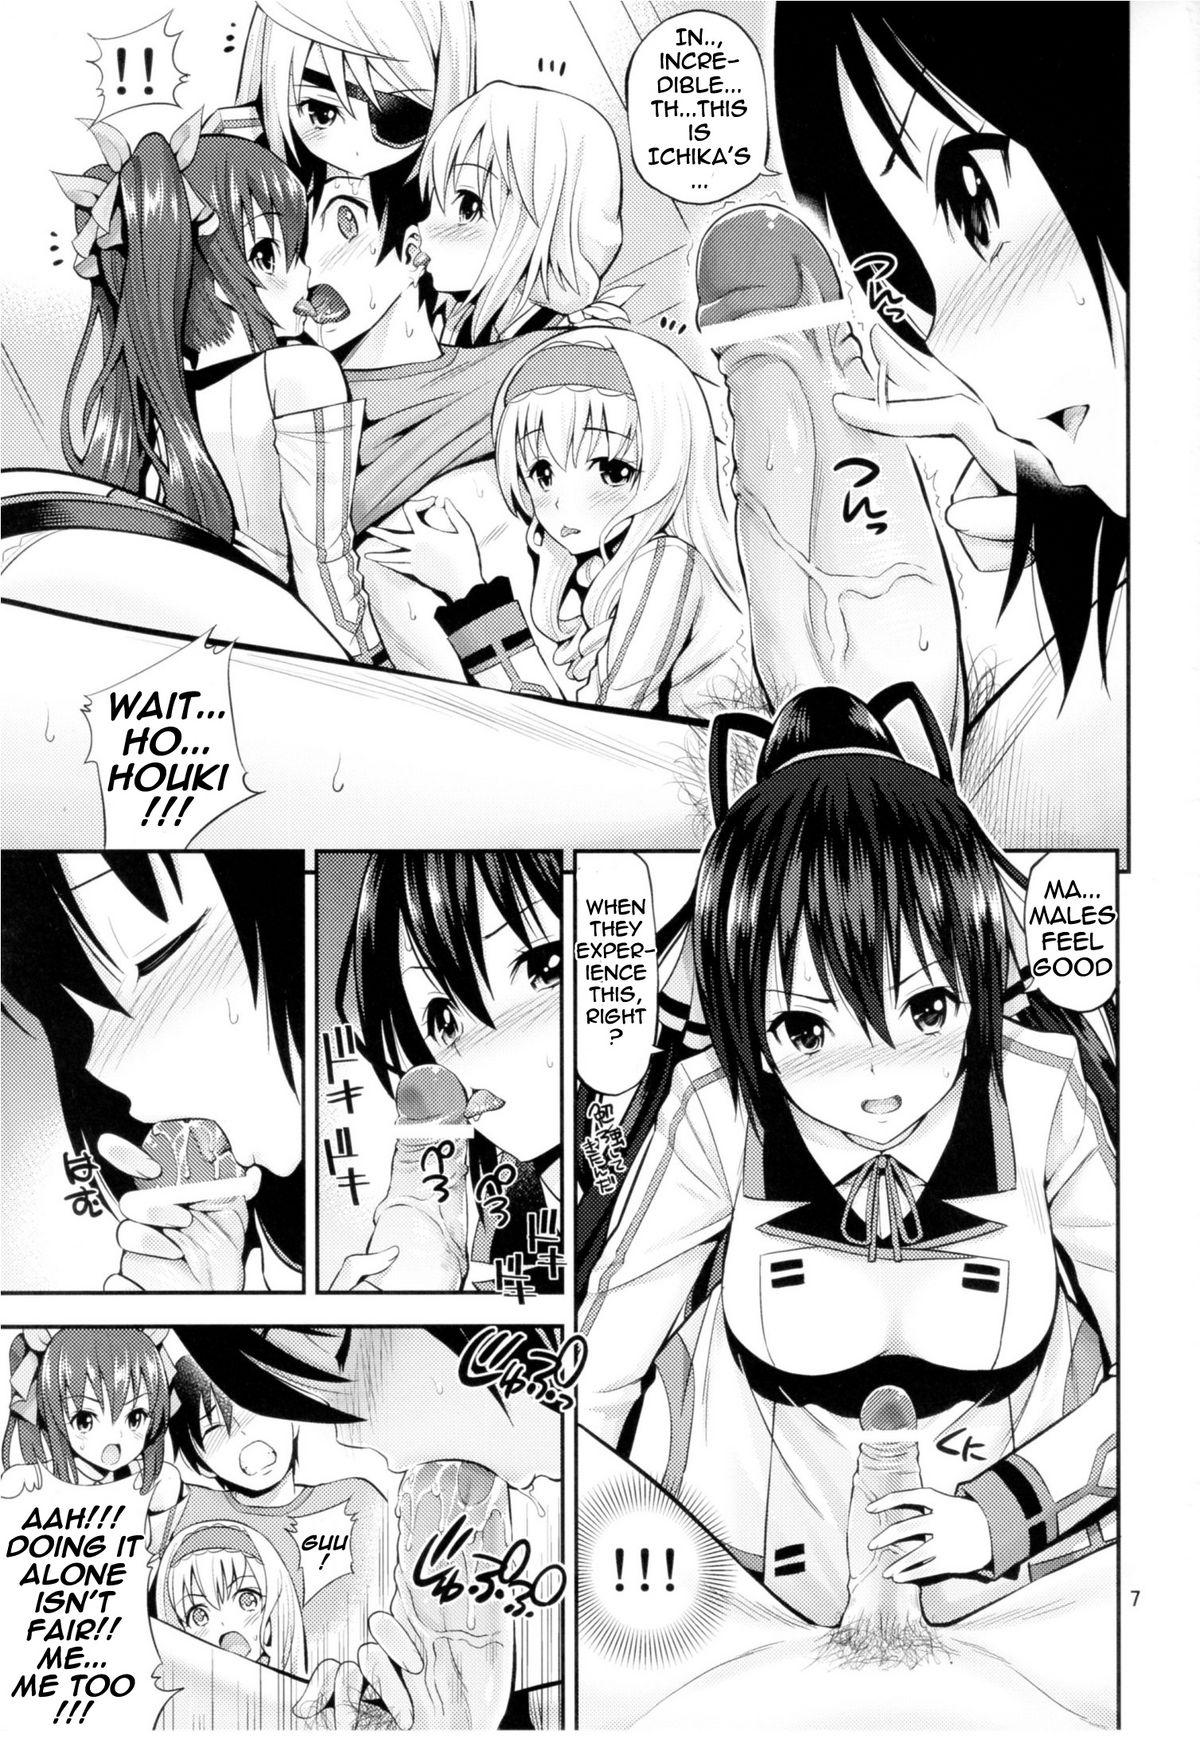 Titty Fuck This is Harlem - Infinite stratos Branquinha - Page 6